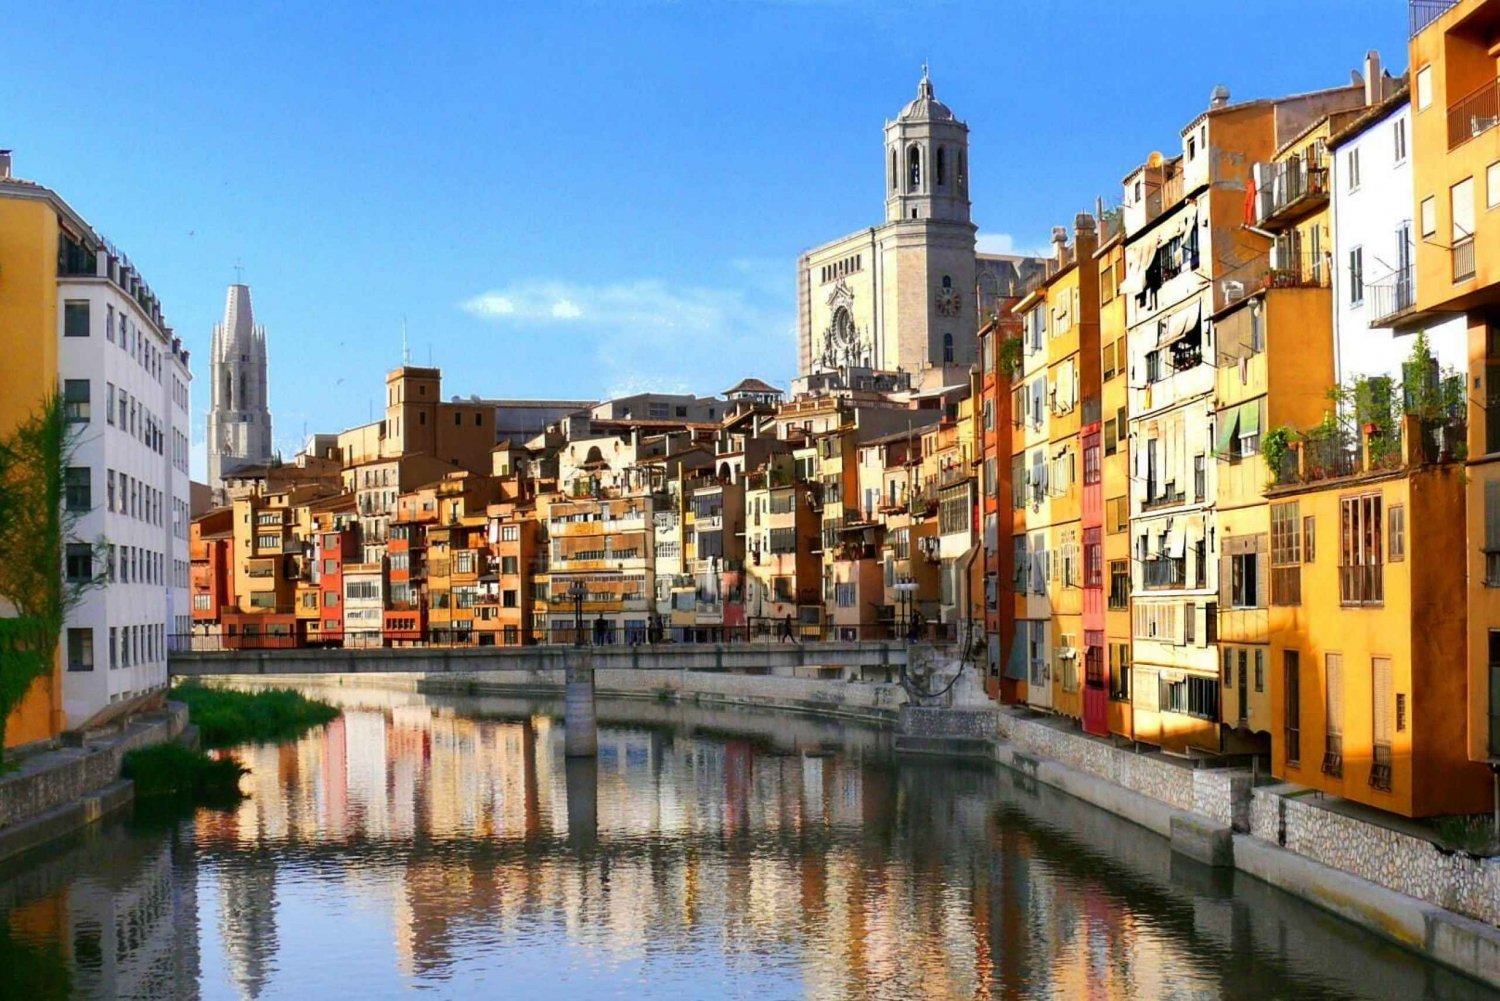 Girona and Figueres Full-Day Tour with Hotel Pick Up